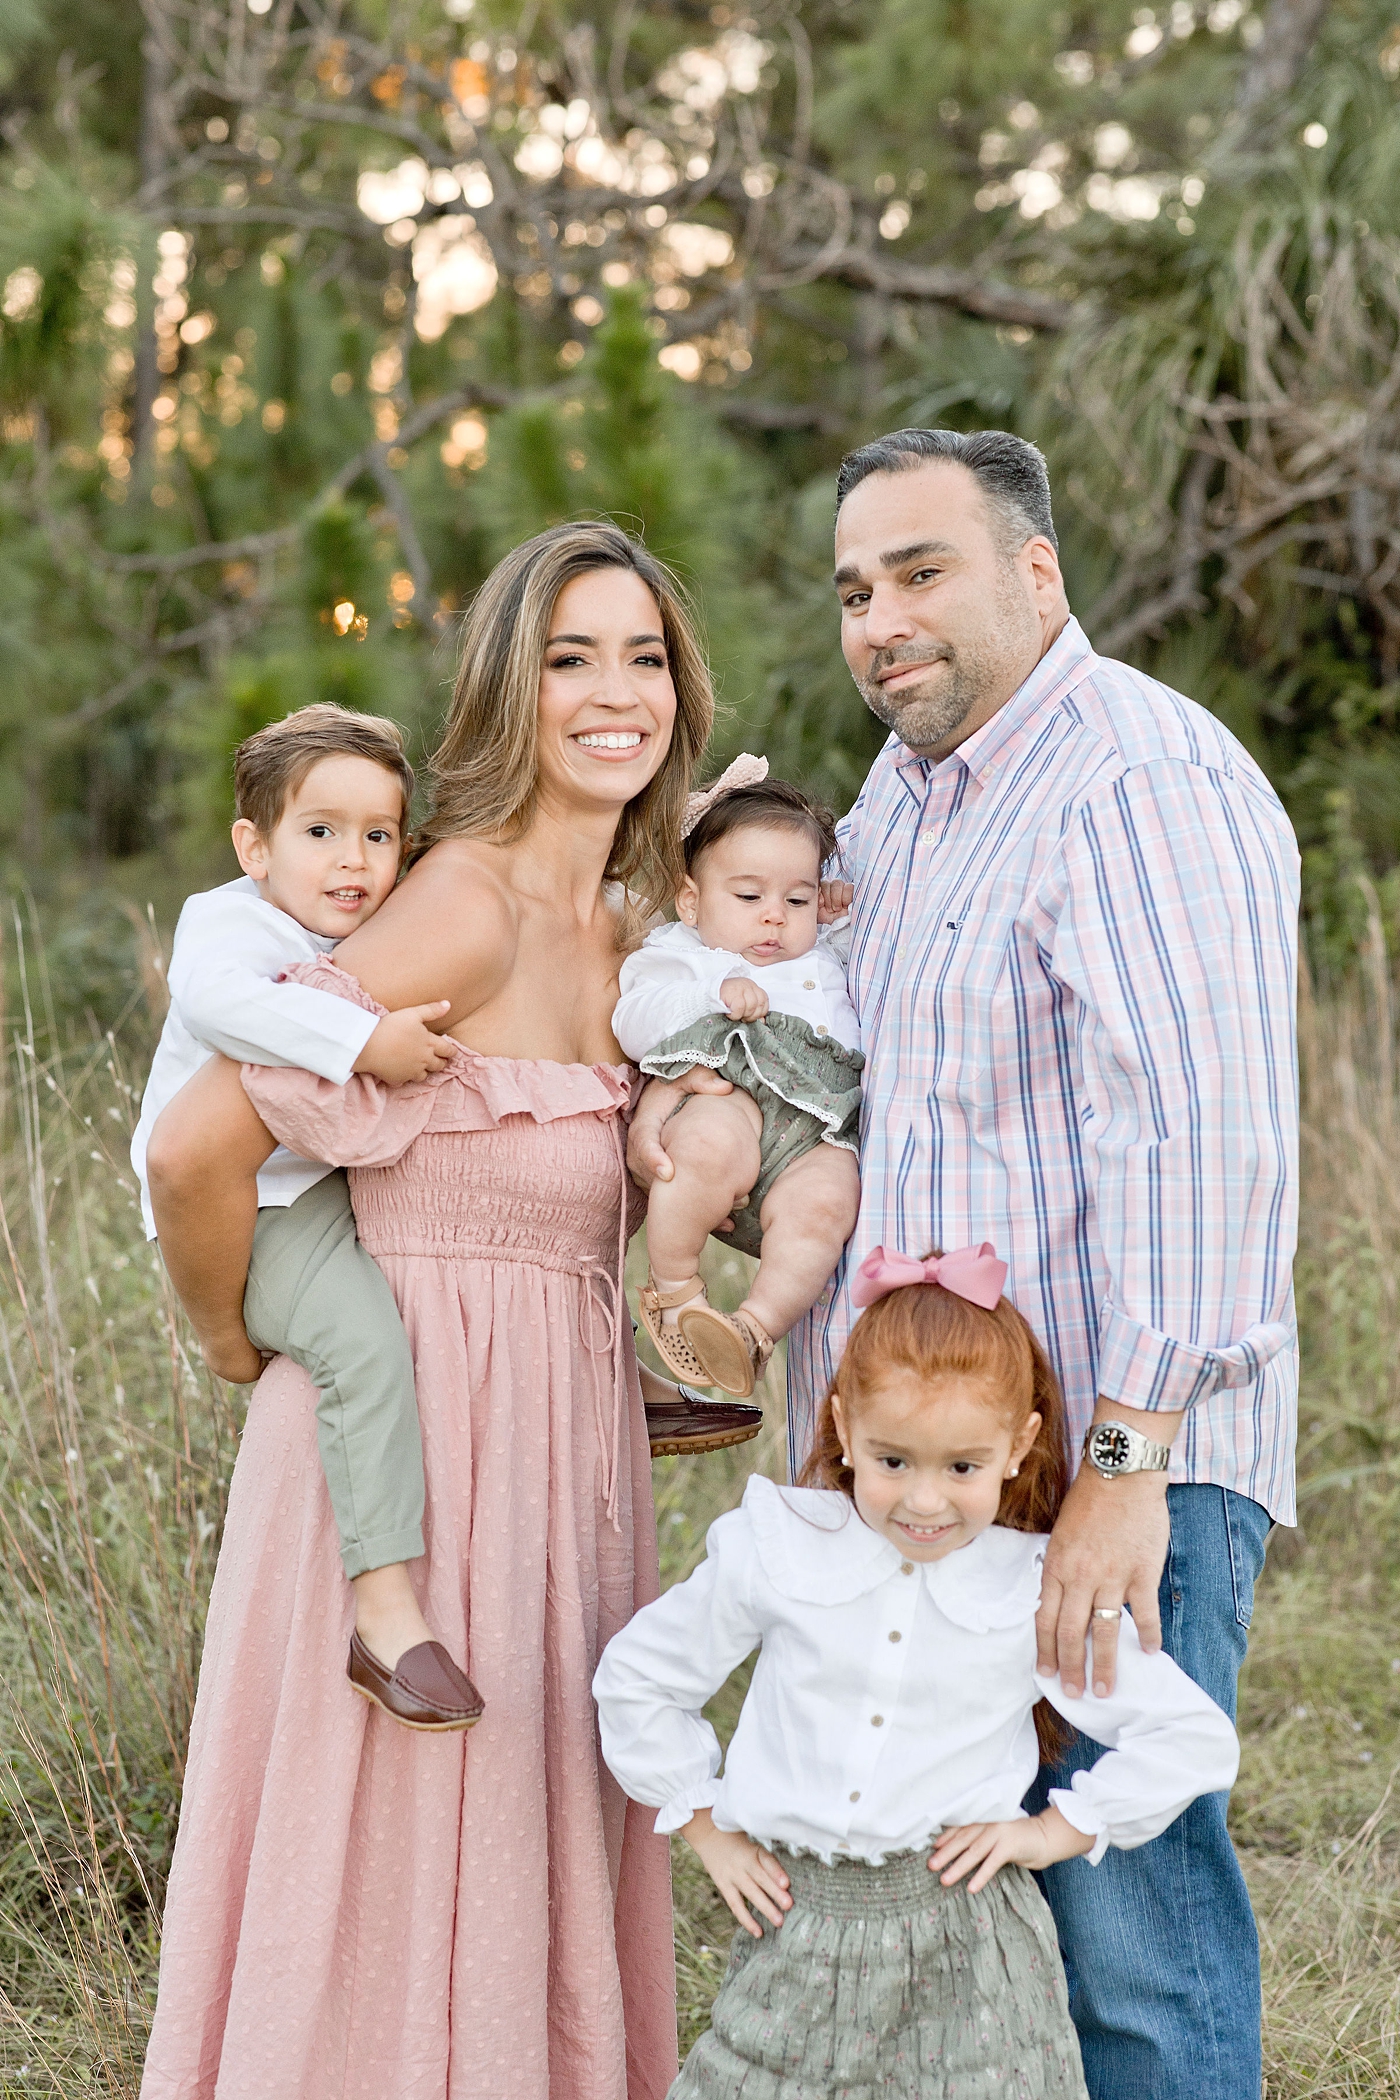 Family of five snuggle in close for photograph during Miami family session. Photo by Ivanna Vidal Photography.